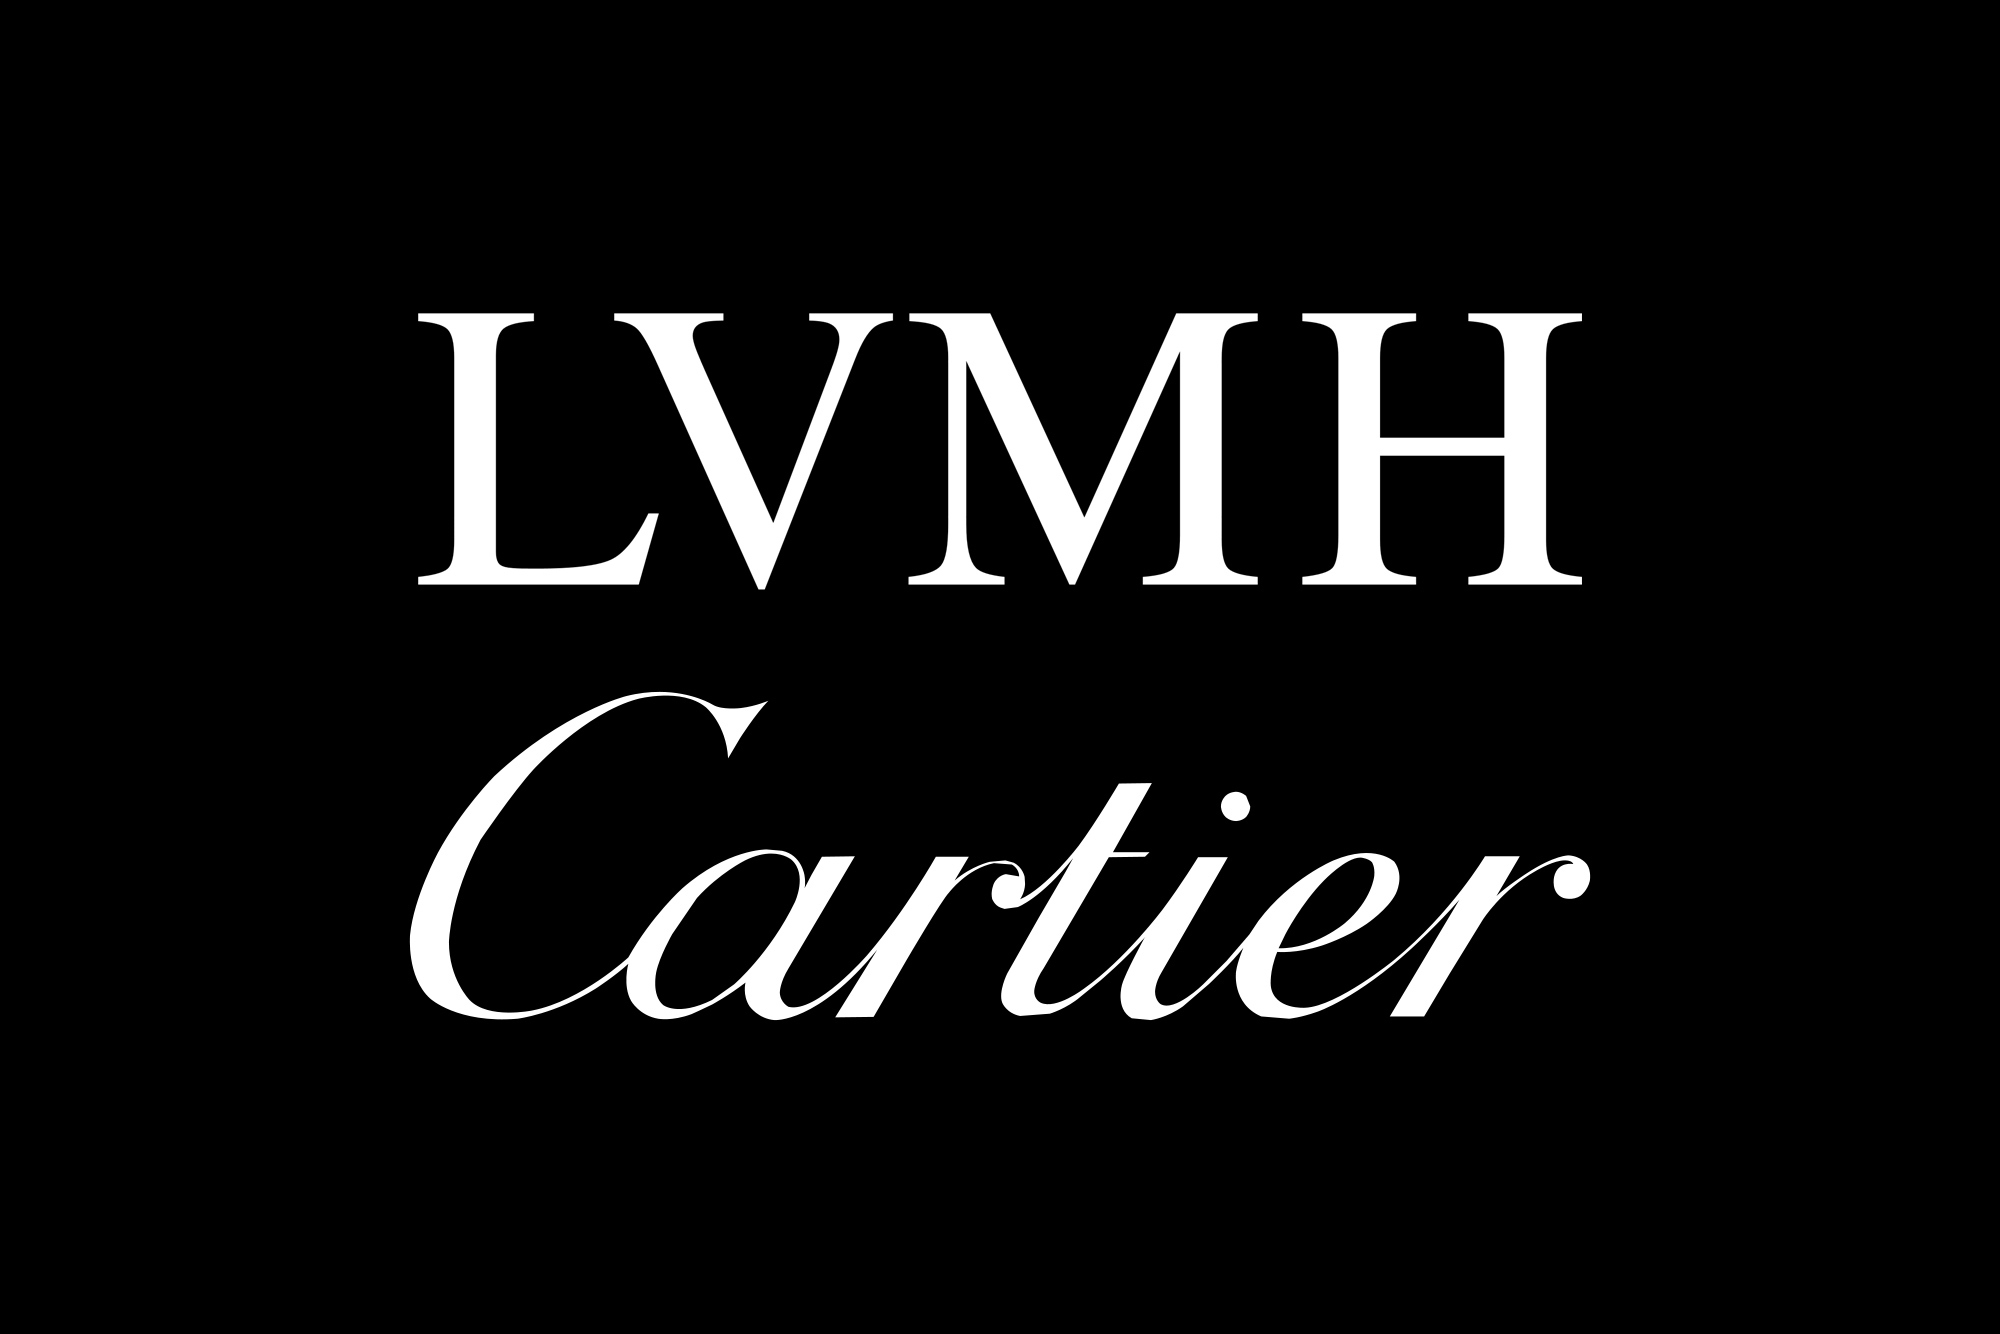 Libertex on X: LVMH Moët Hennessy Louis Vuitton, commonly known as #LVMH,  is a French multinational holding and conglomerate specializing in #luxury  goods, headquartered in Paris. Earlier this year, LVMH was named